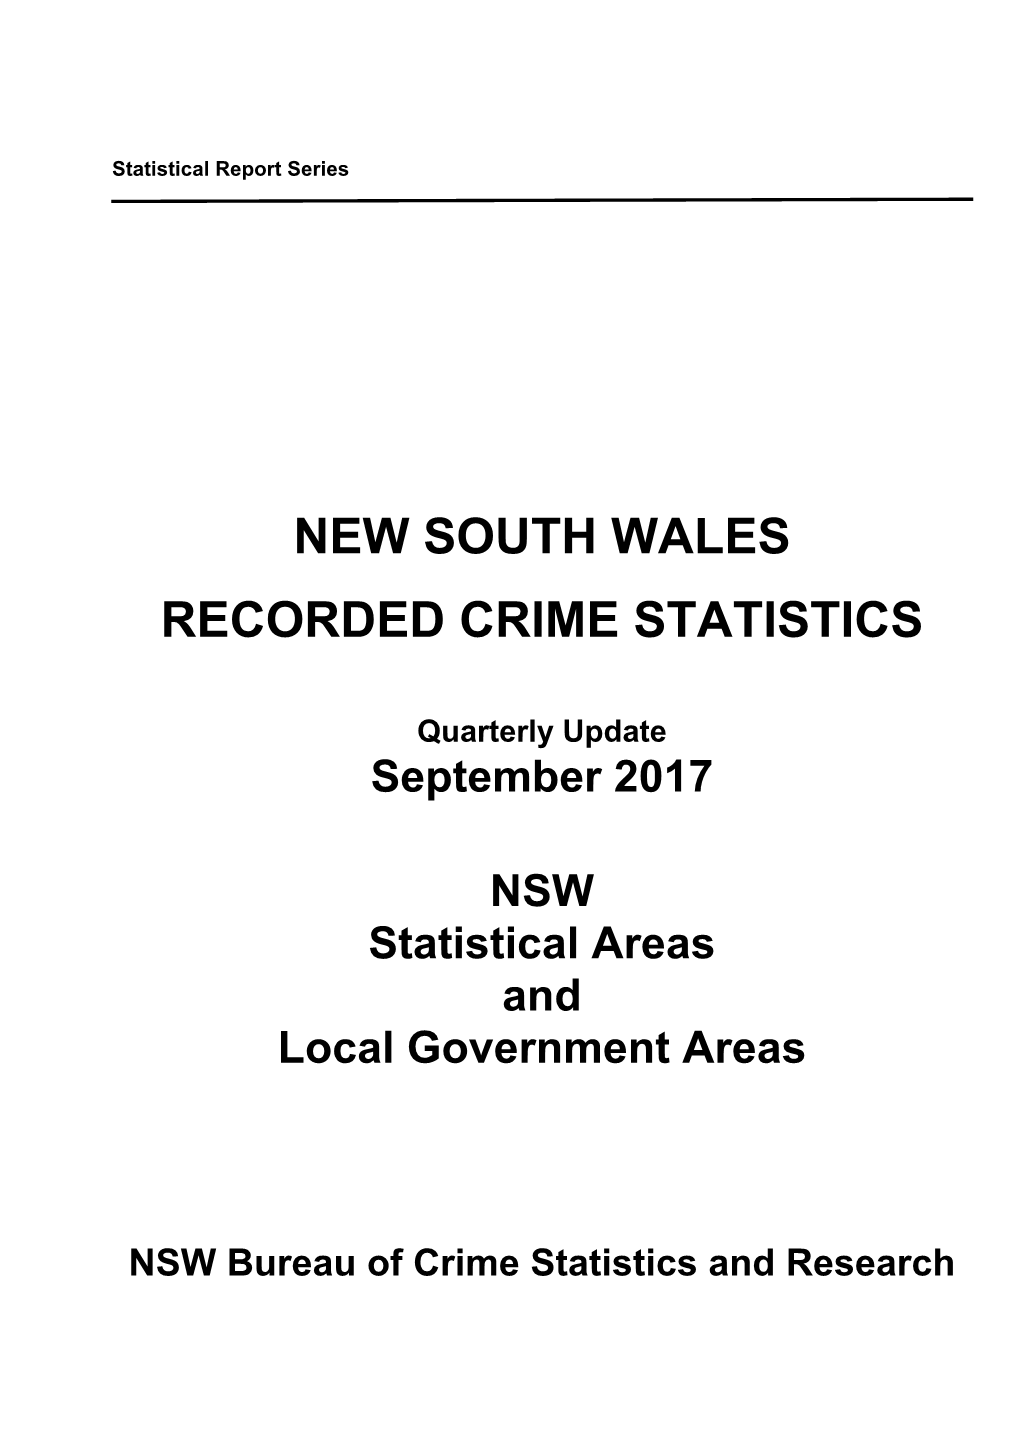 New South Wales Recorded Crime Statistics